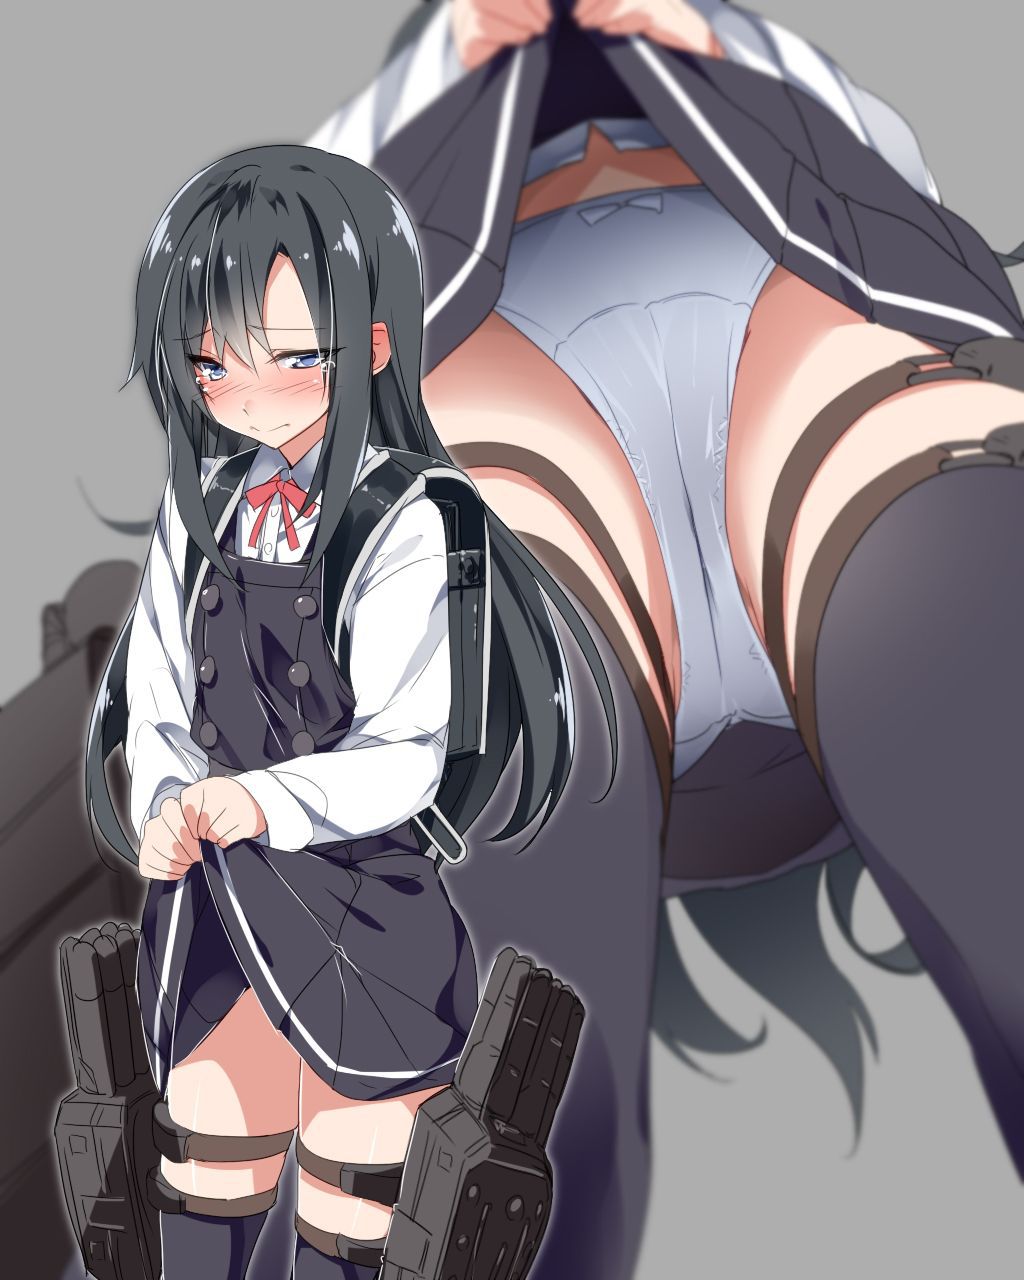 [Secondary, ZIP] pretty serious ship it together images of asashio 100 54